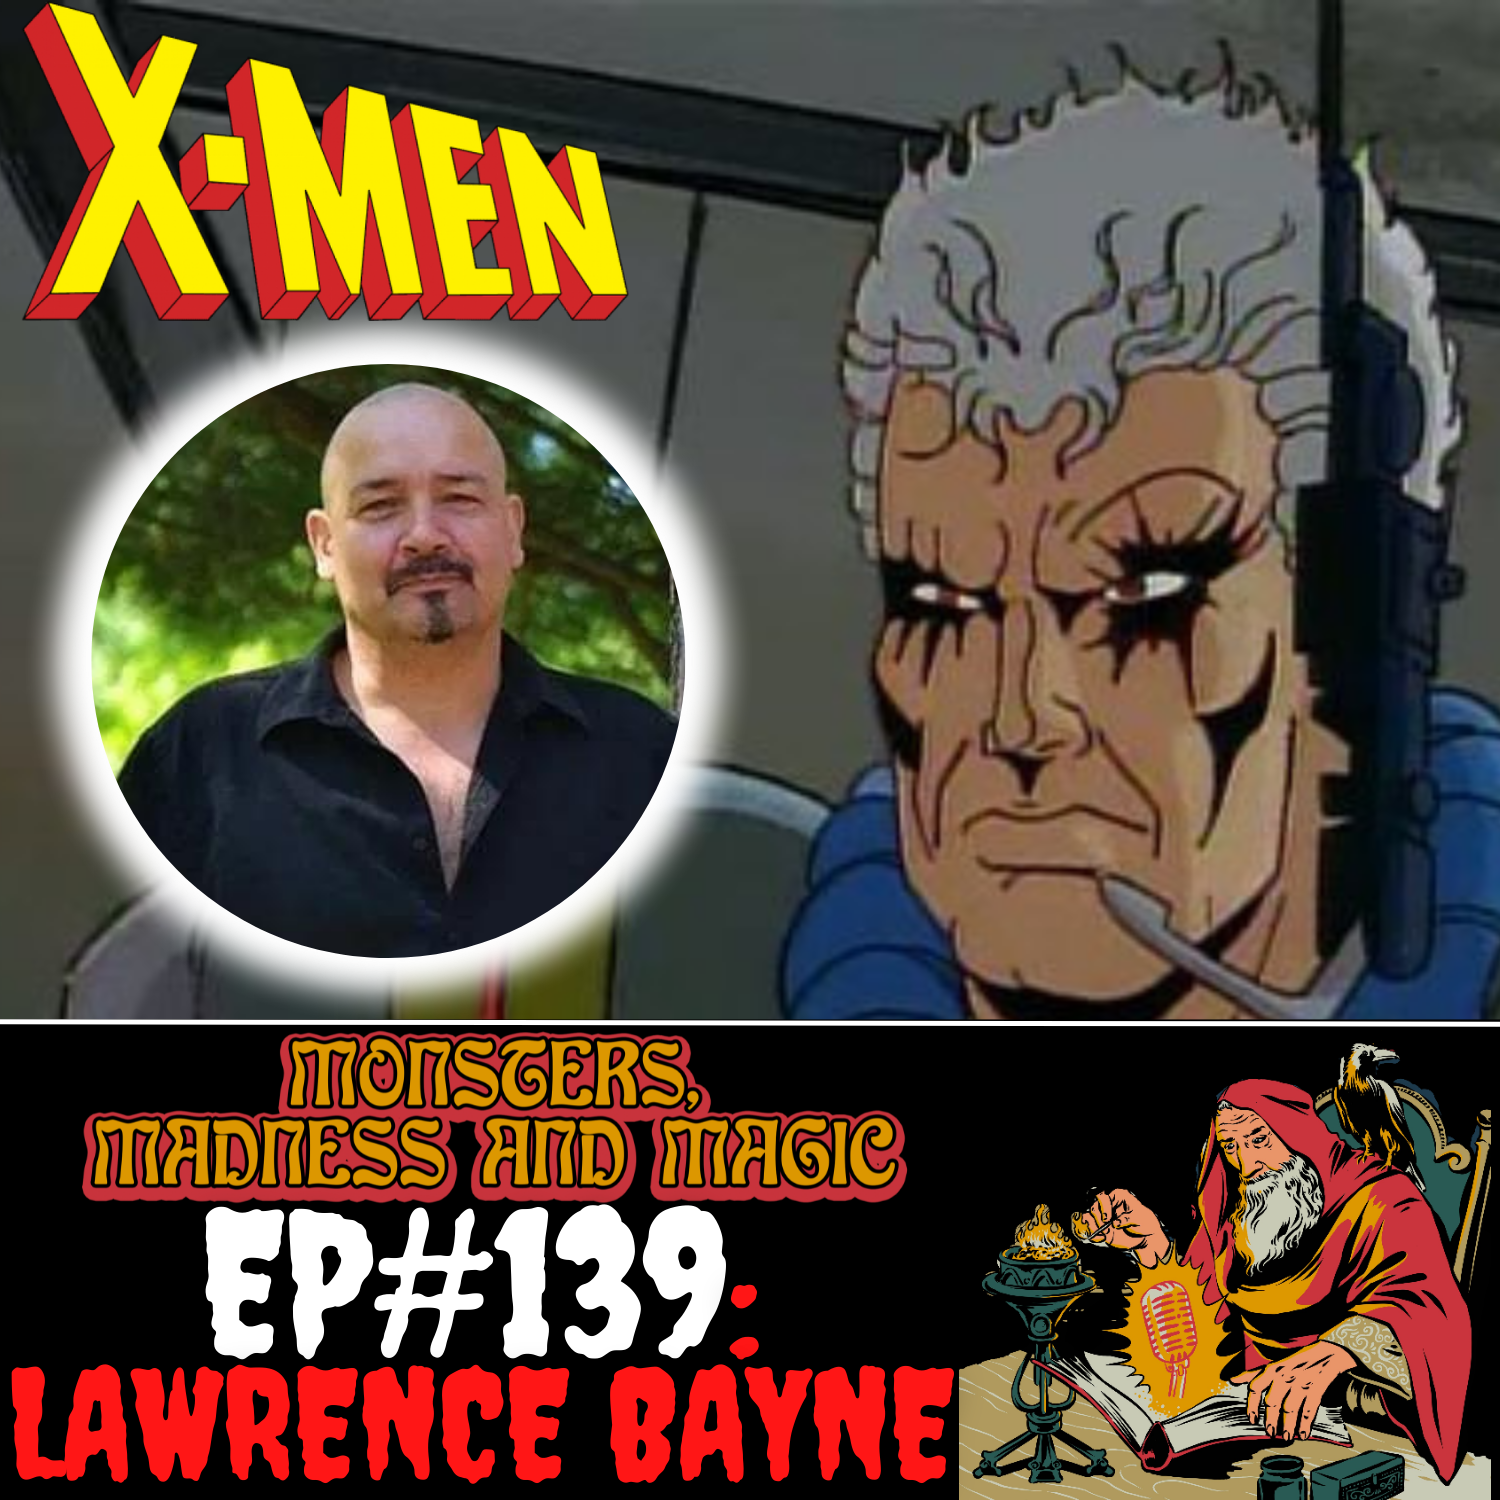 EP#139: Of Mutants and Mercenaries - An interview with Lawrence Bayne